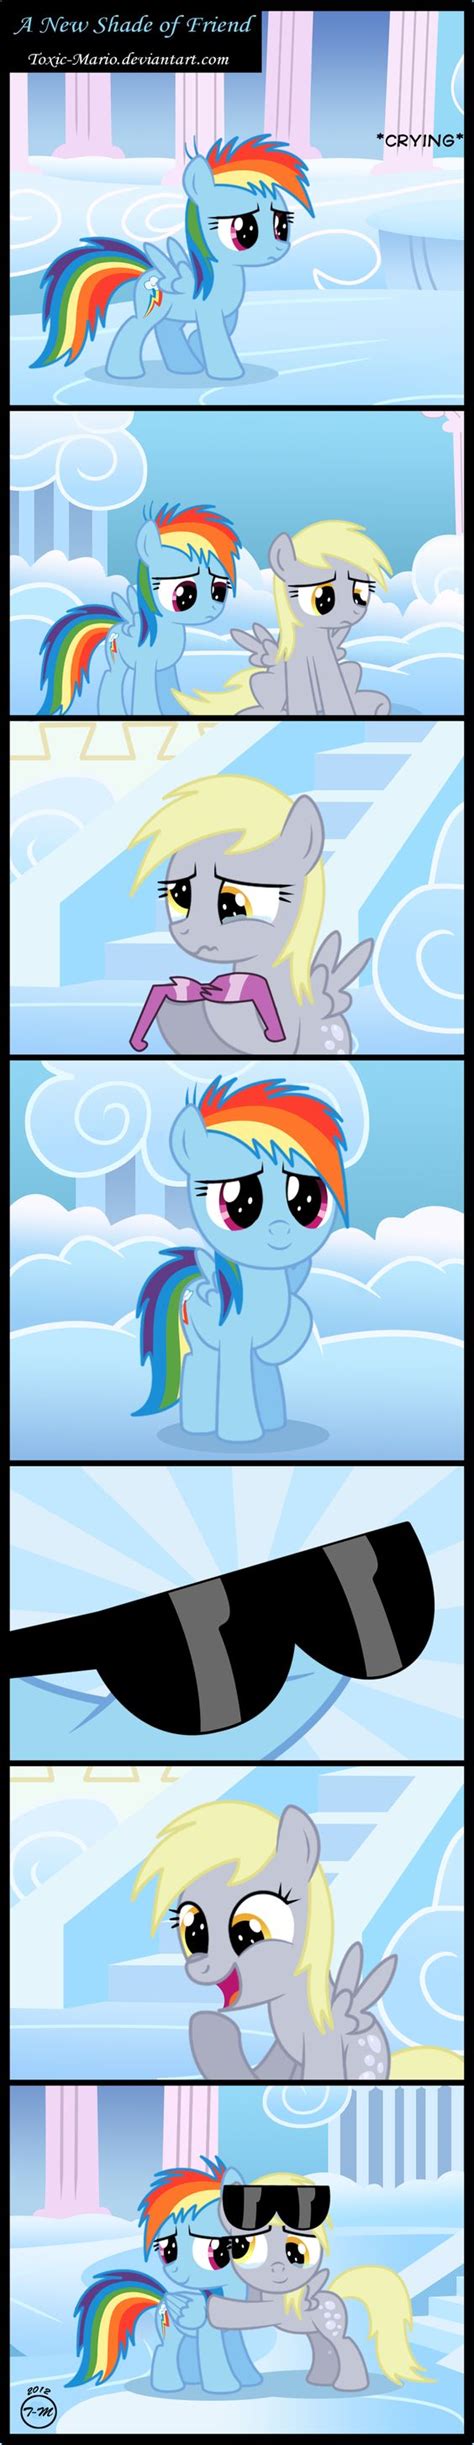 This Is So Sweet Why Do I Feel Like Crying Derpy Hooves And Rainbow